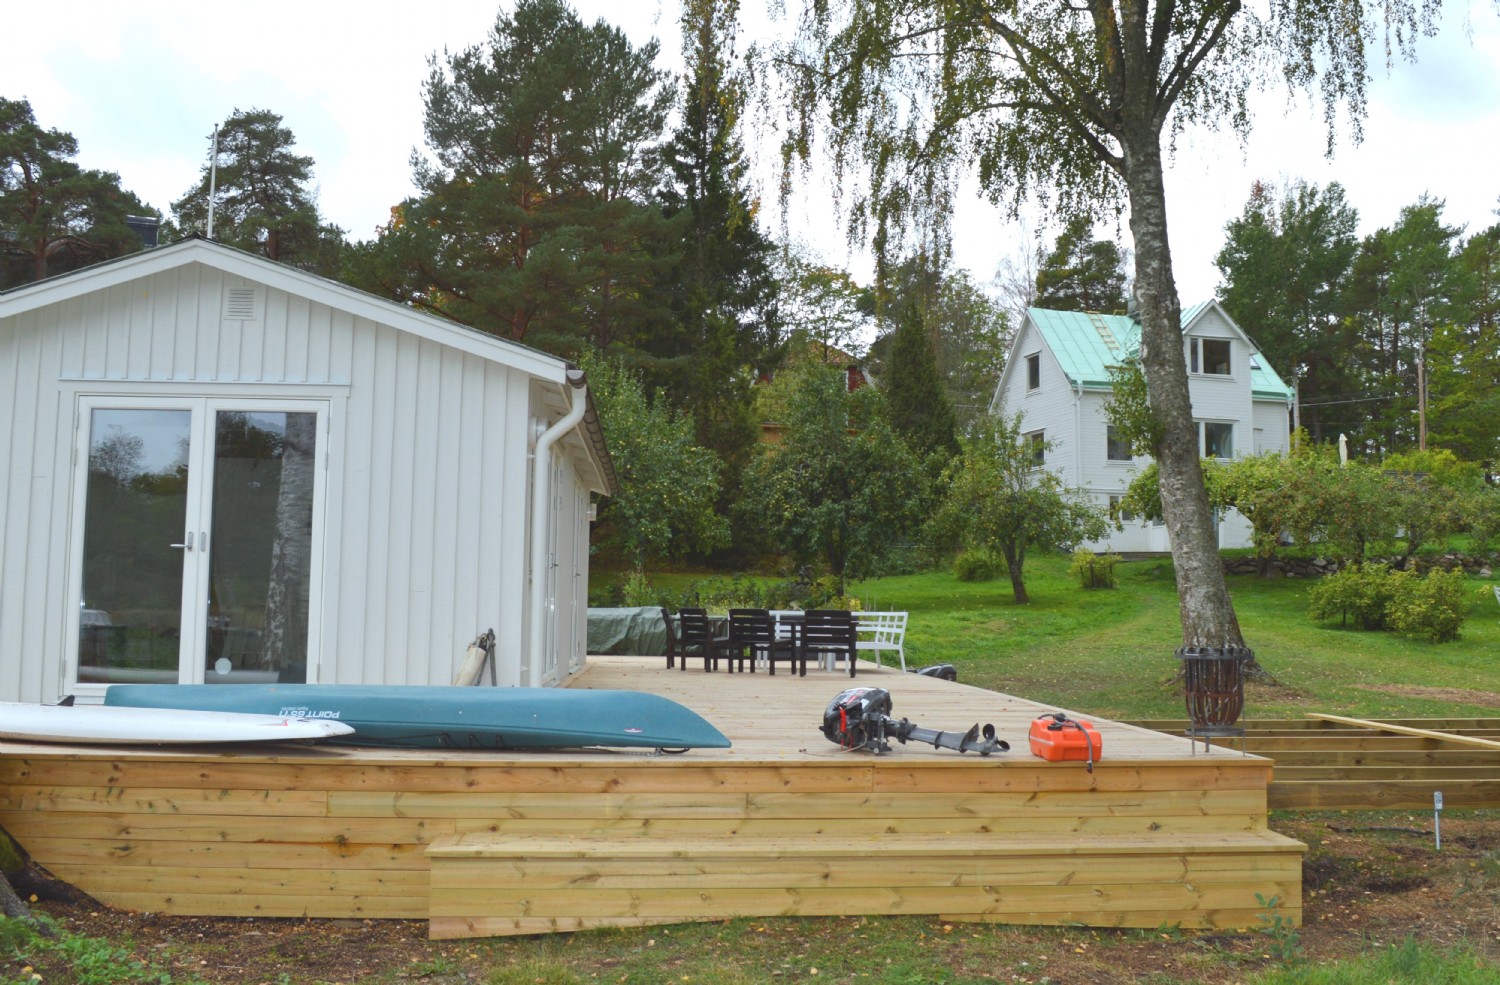 Nya gsthuset/ New guest house  